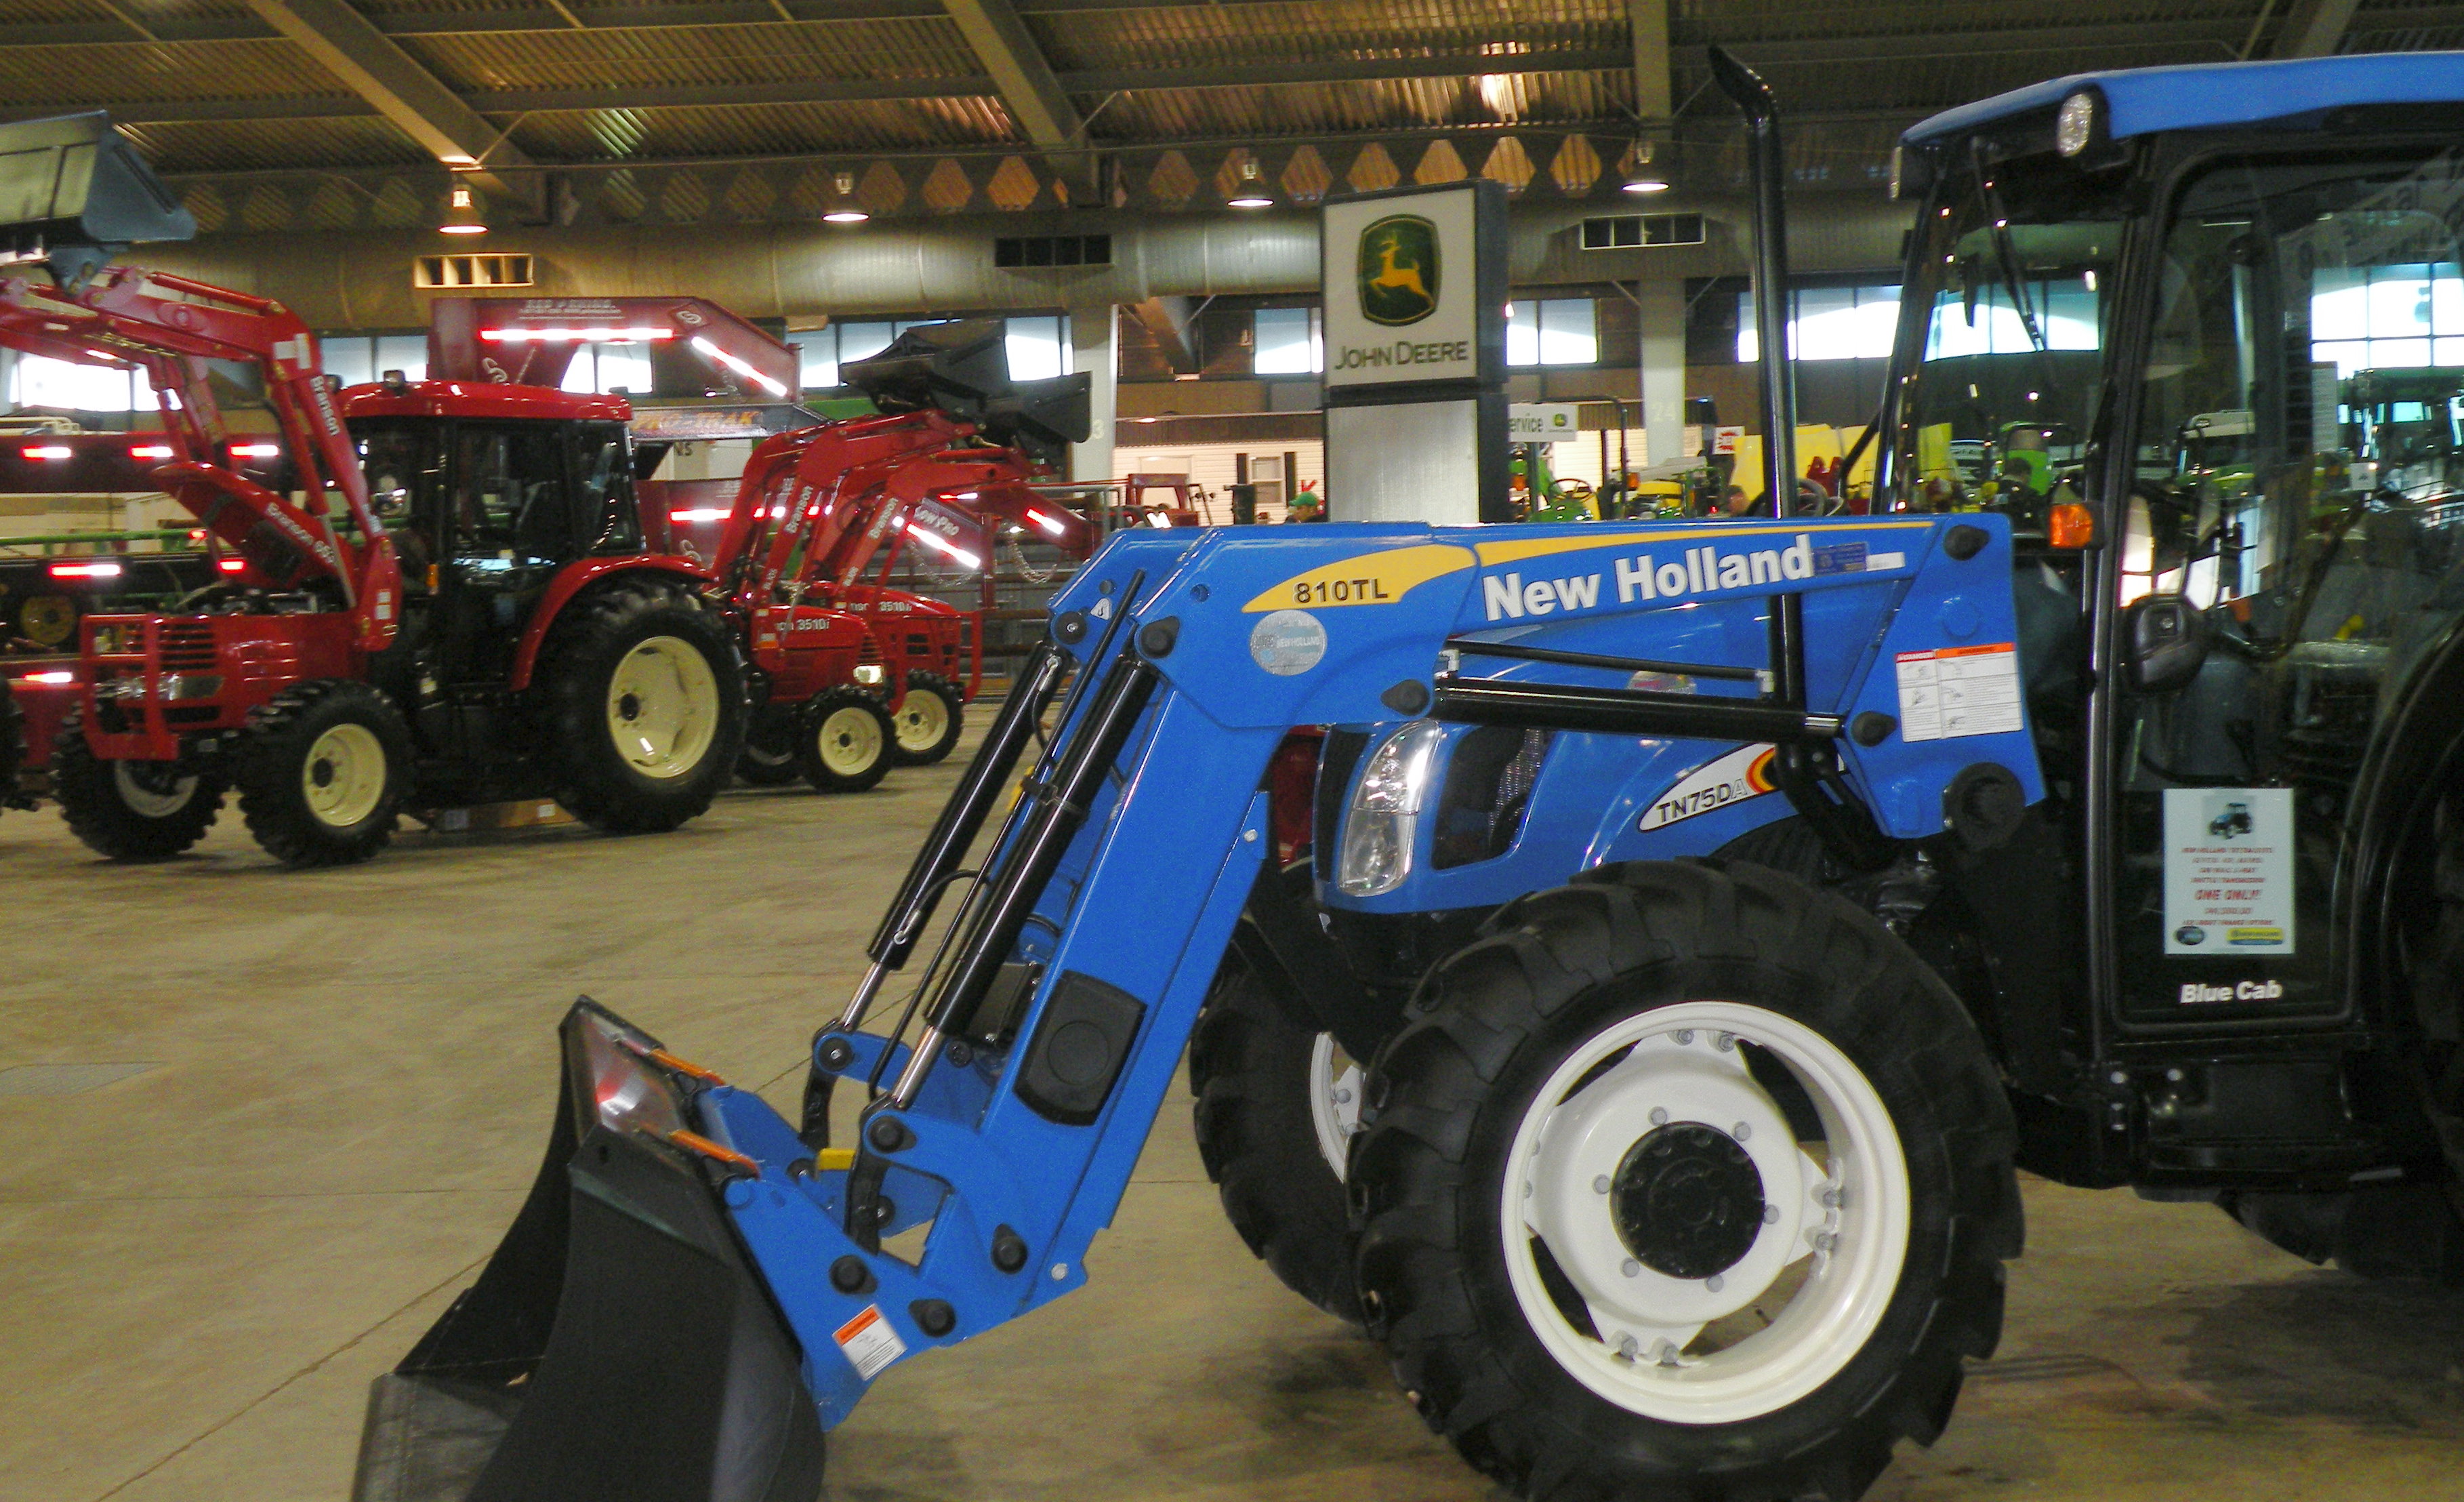 Midyear U.S. agricultural equipment exports up 4 percent compared to 2009 